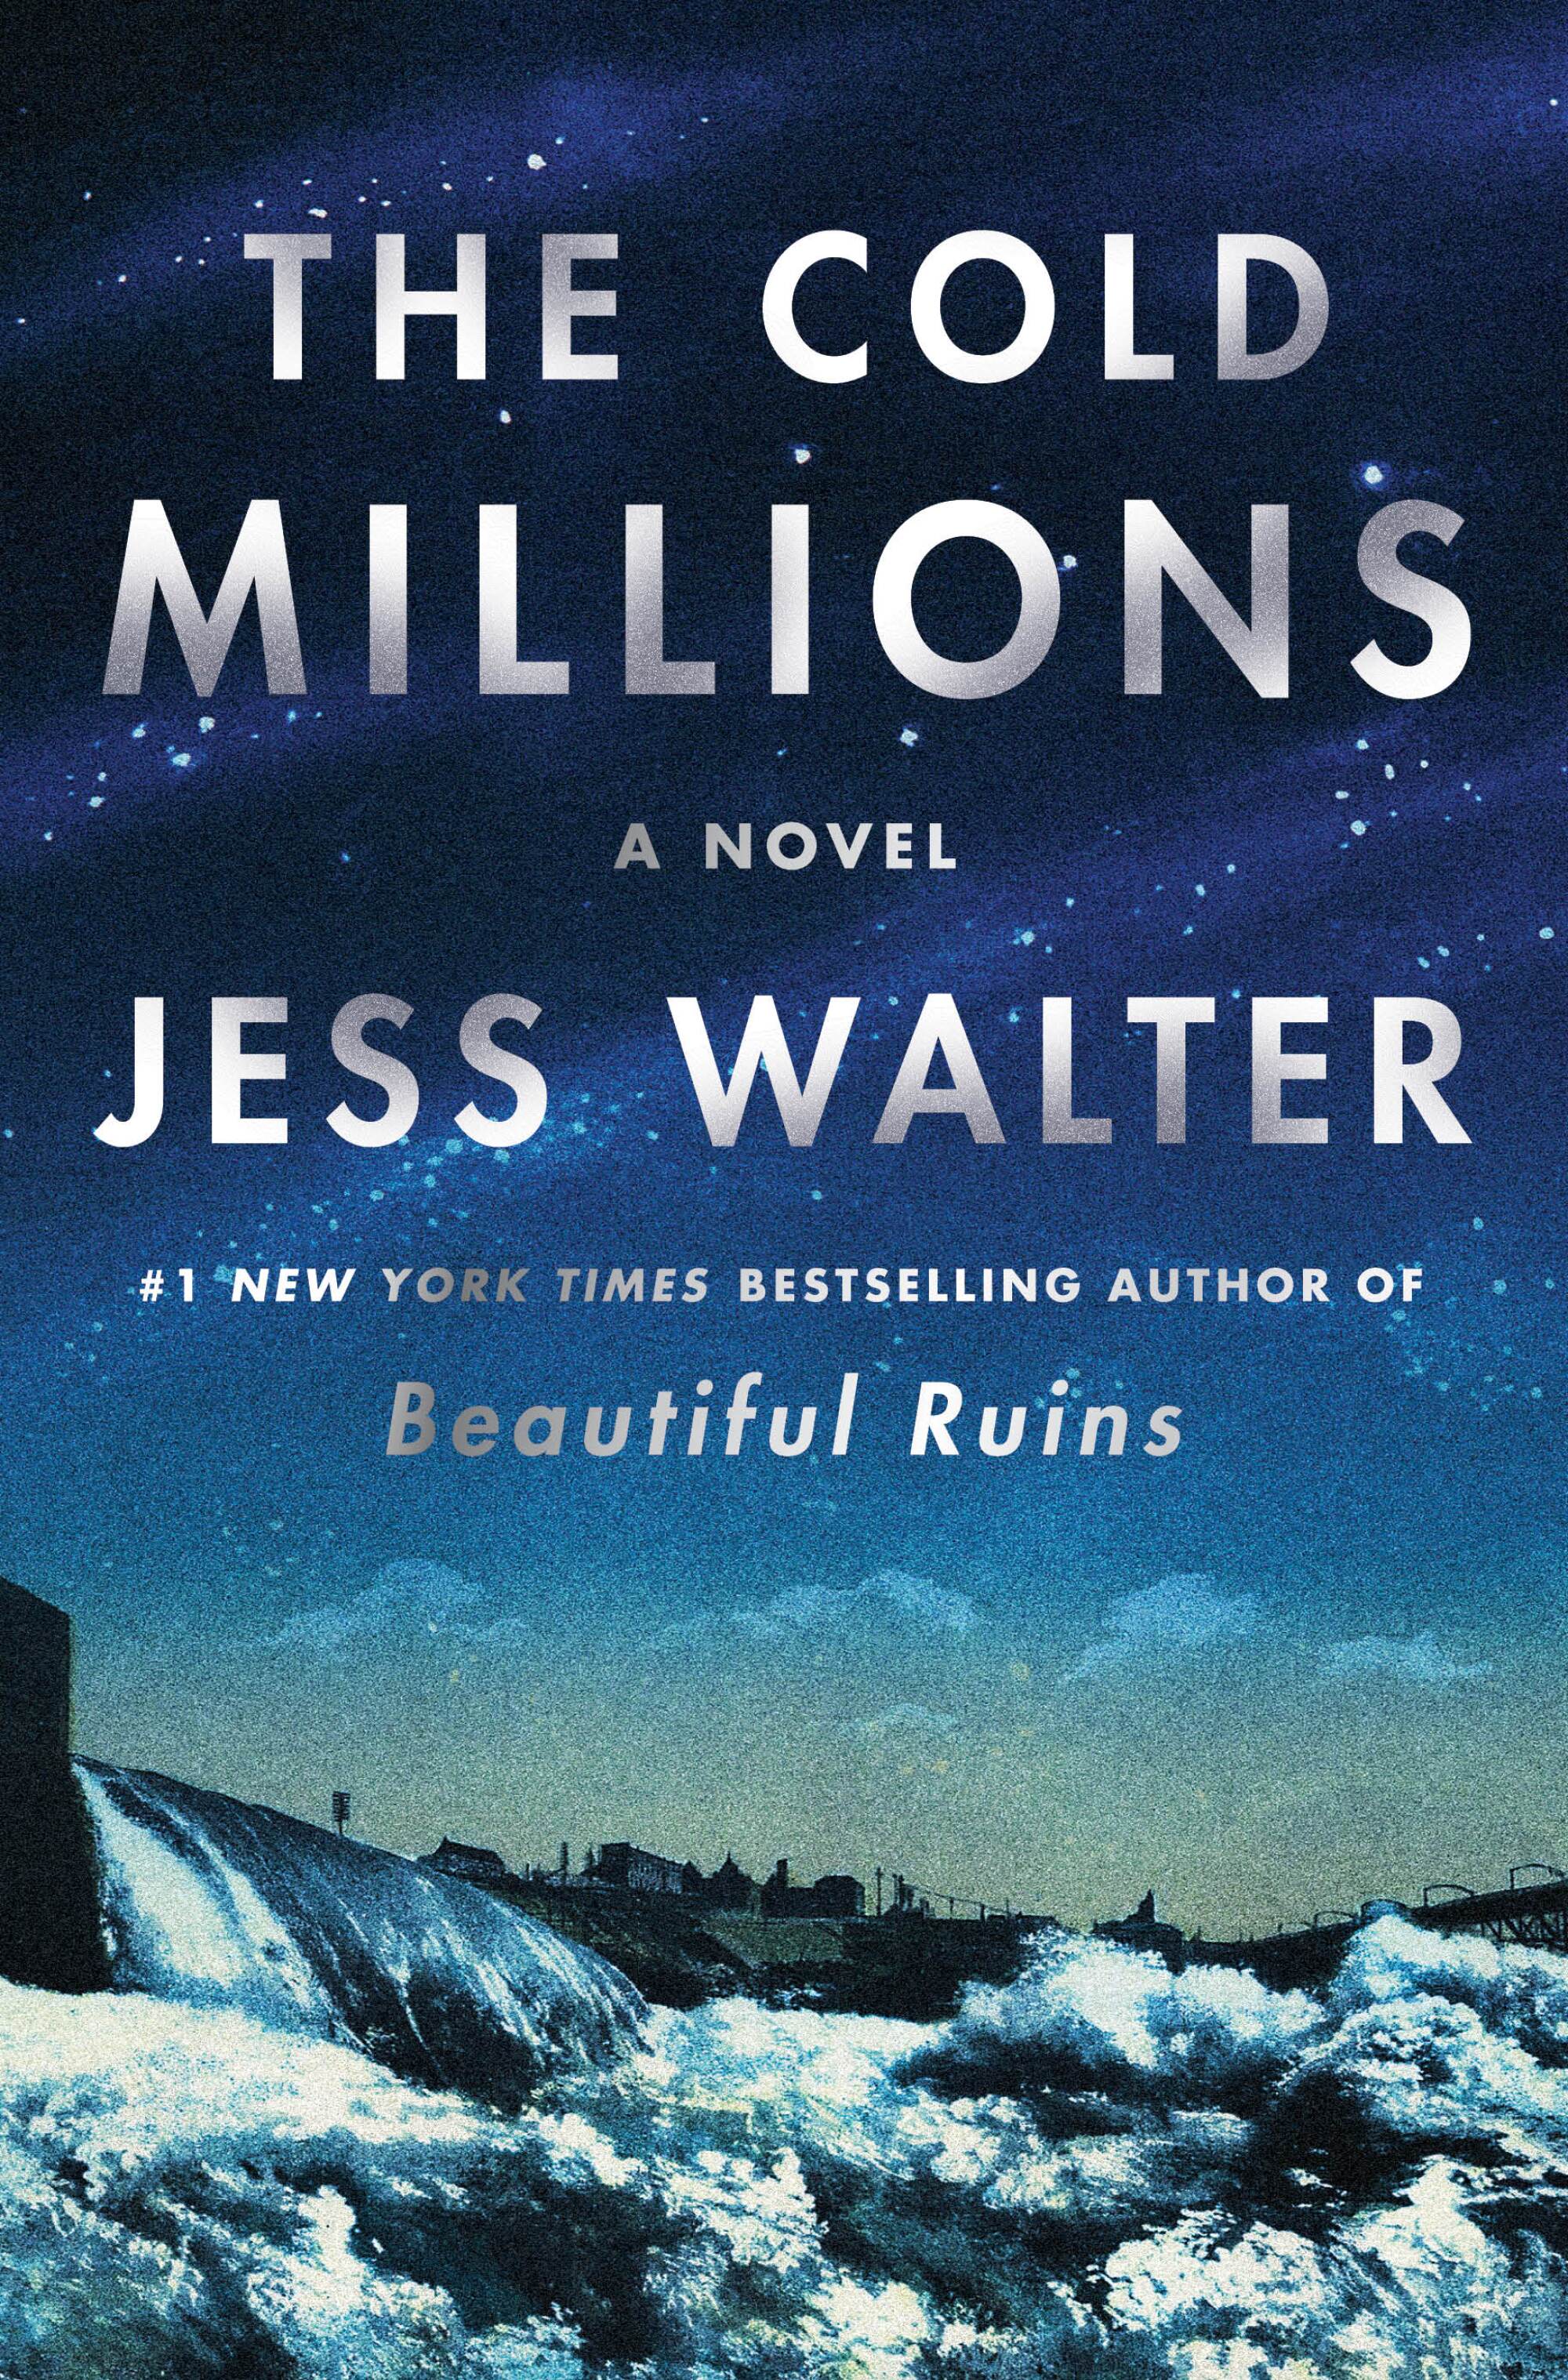 Book jacket for "The Cold Millions" by Jess Walter